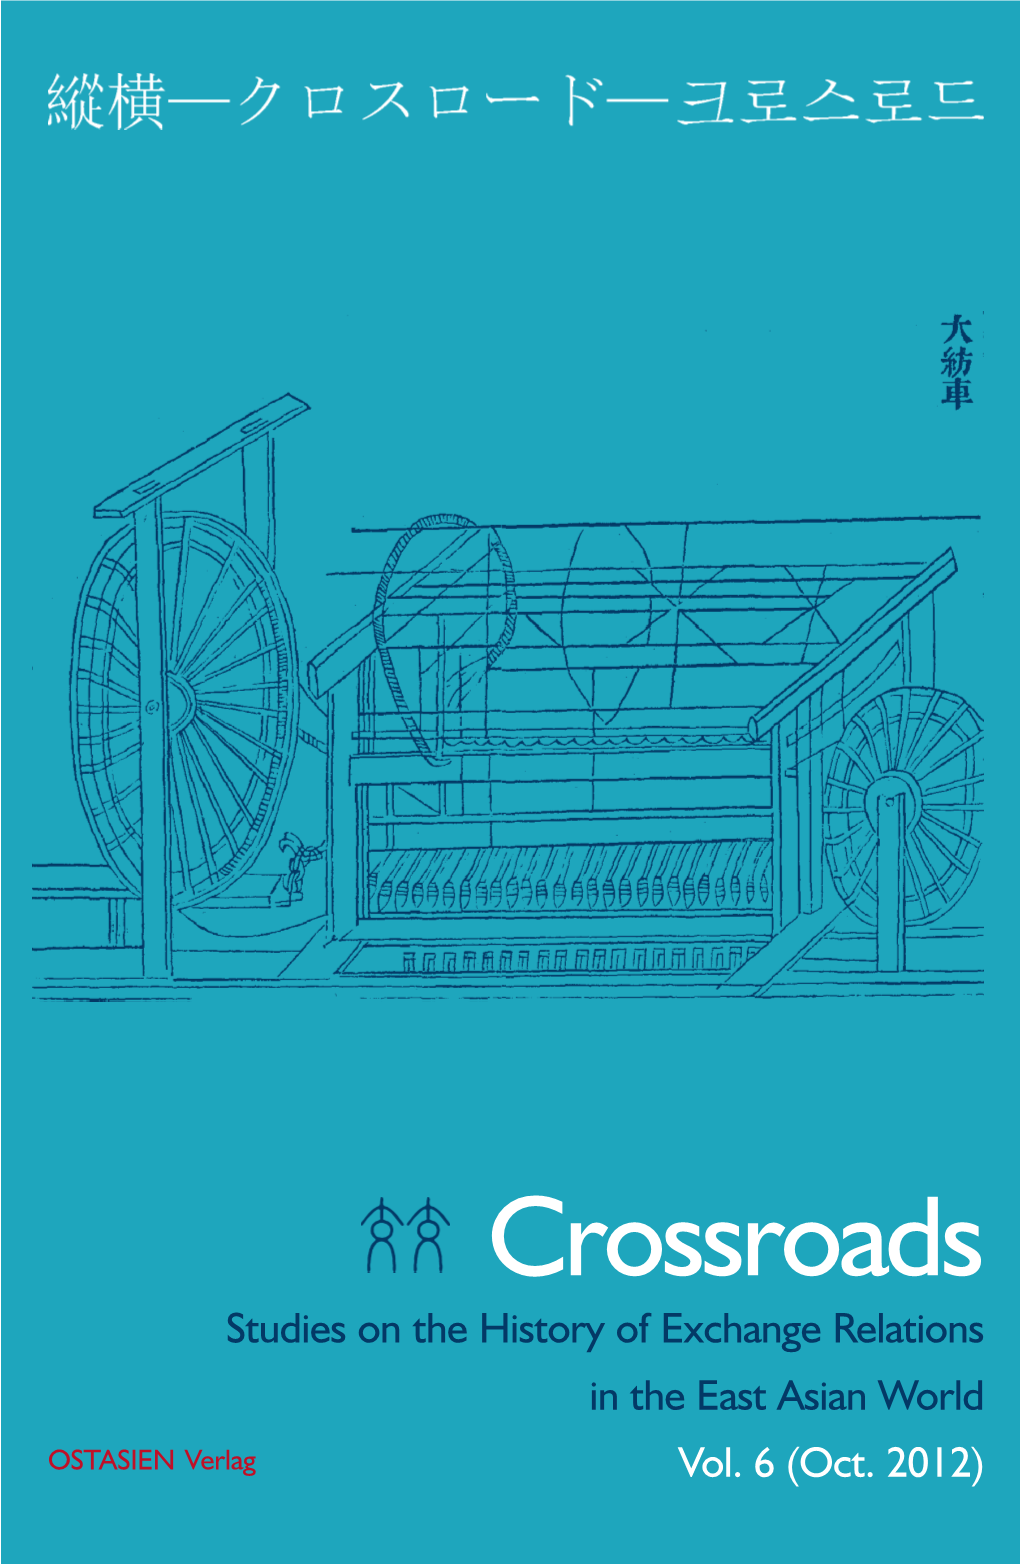 Crossroads Studies on the History of Exchange Relations in the East Asian World OSTASIEN Verlag Vol